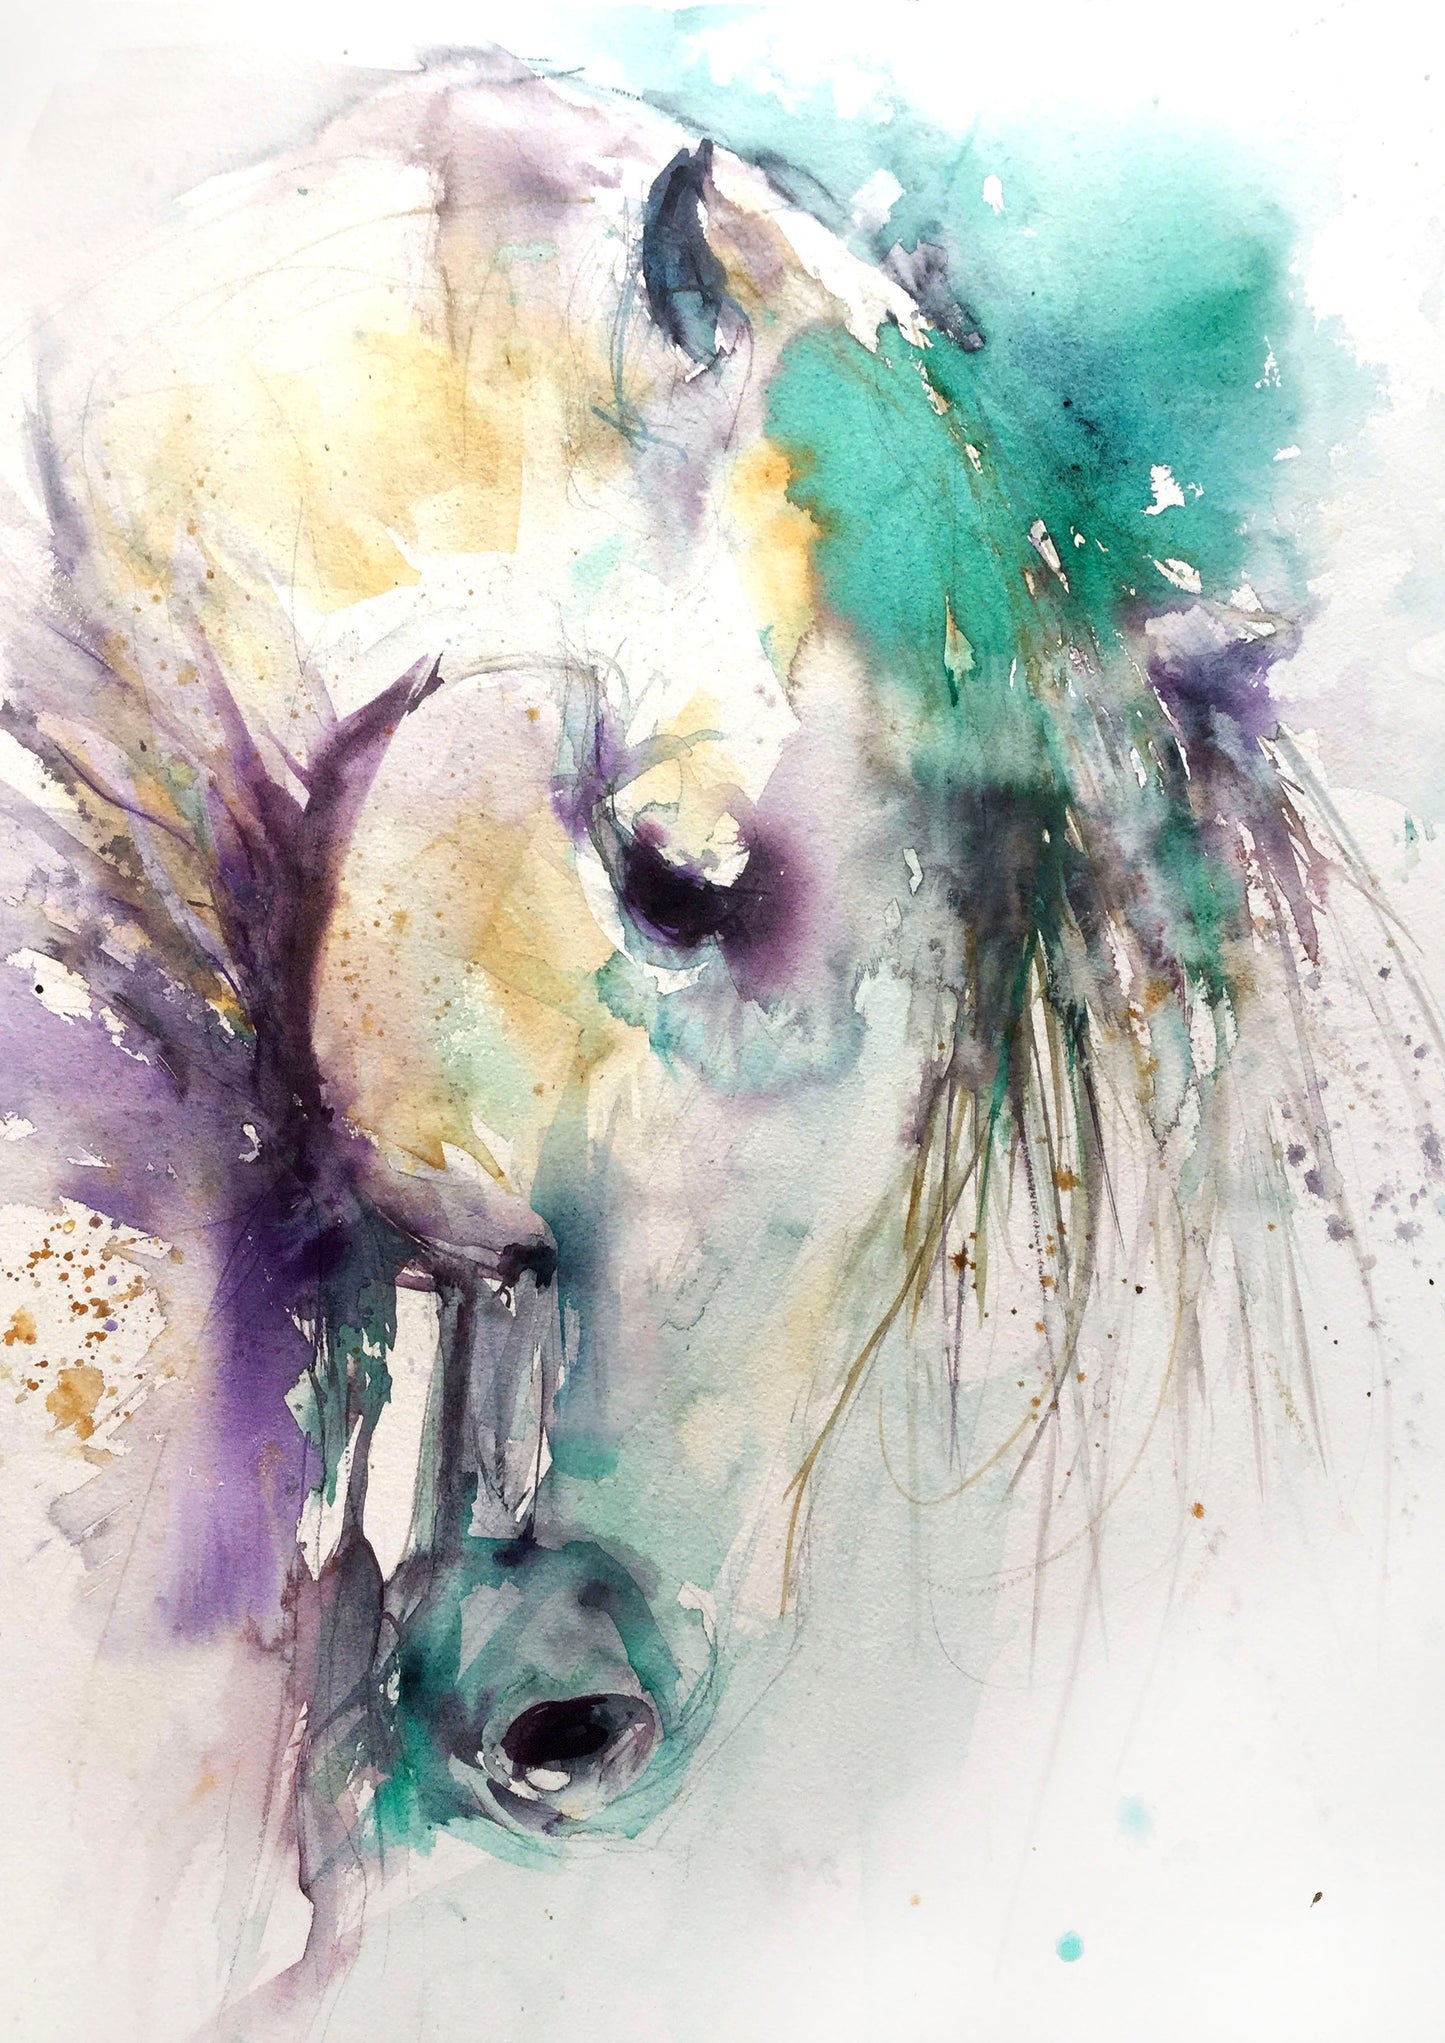 signed LIMITED EDITION PRINT from original HORSE watercolour painting - Jen Buckley Art limited edition animal art prints